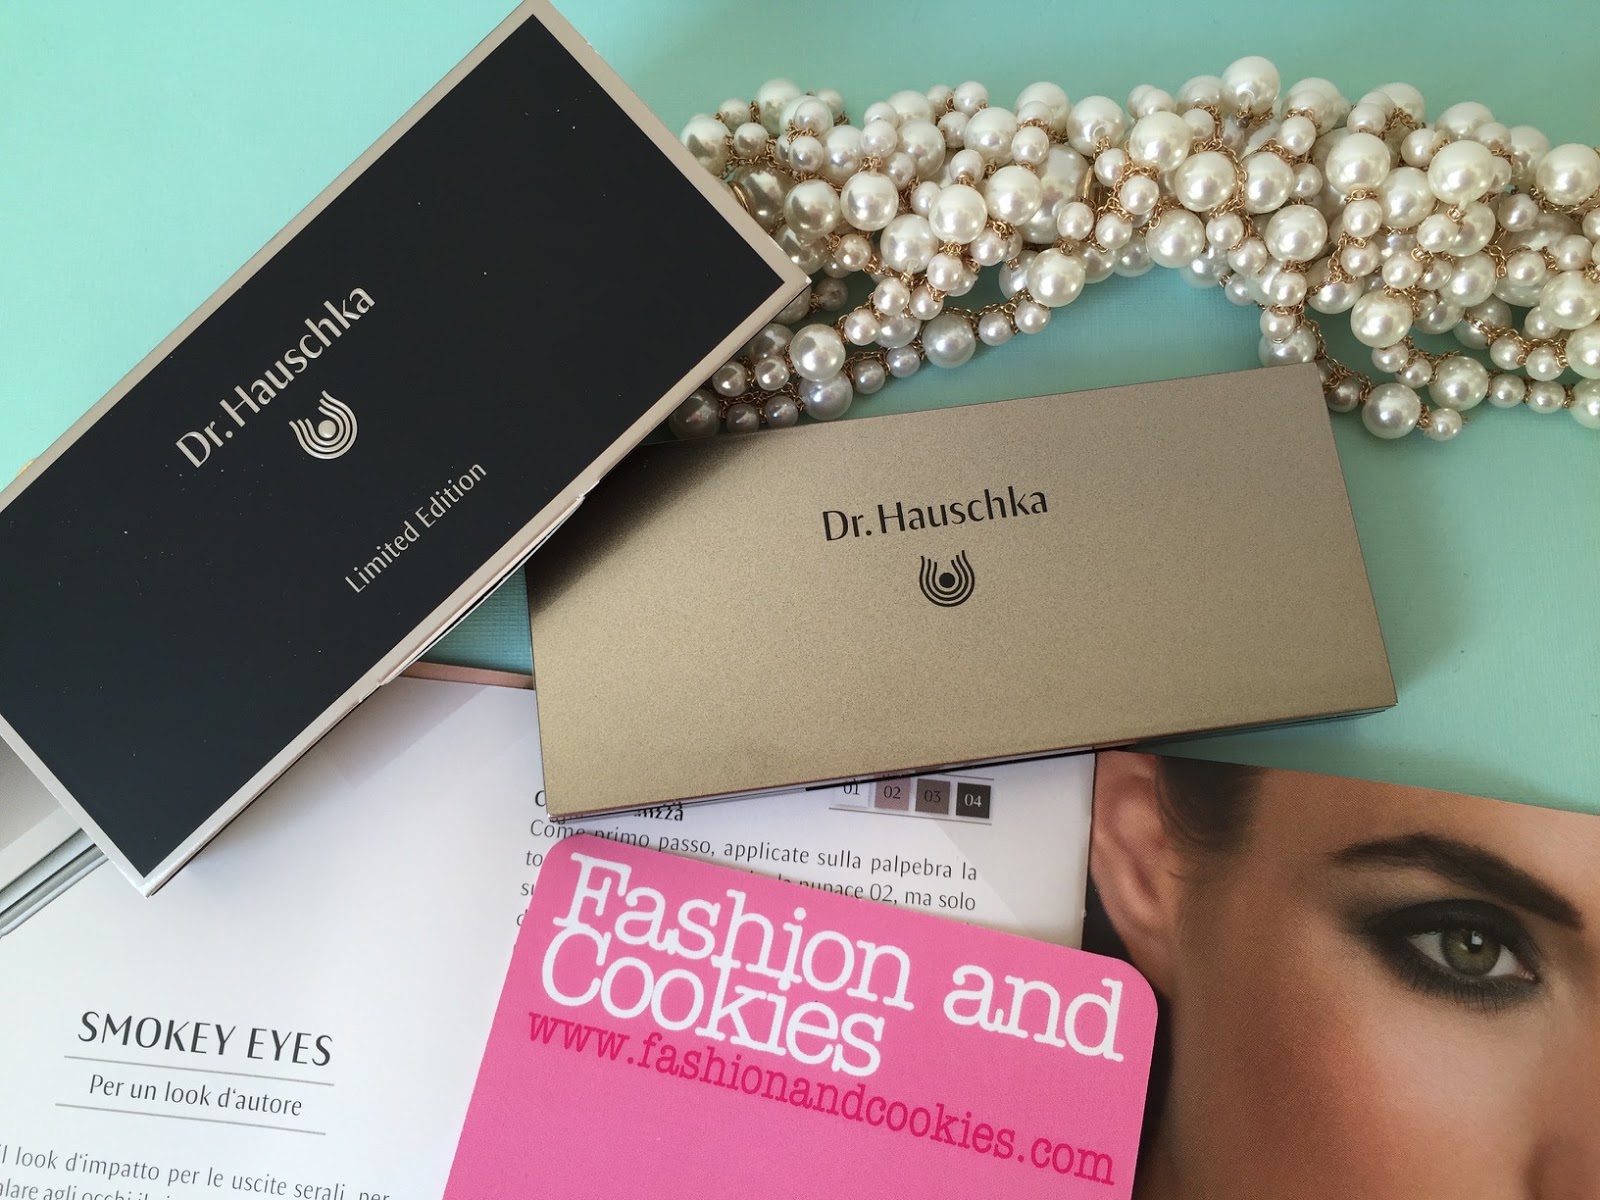 Dr. Hauschka Limited Edition palette Sguardi Preziosi on Fashion and Cookies fashion and beauty blog, fashion blogger style